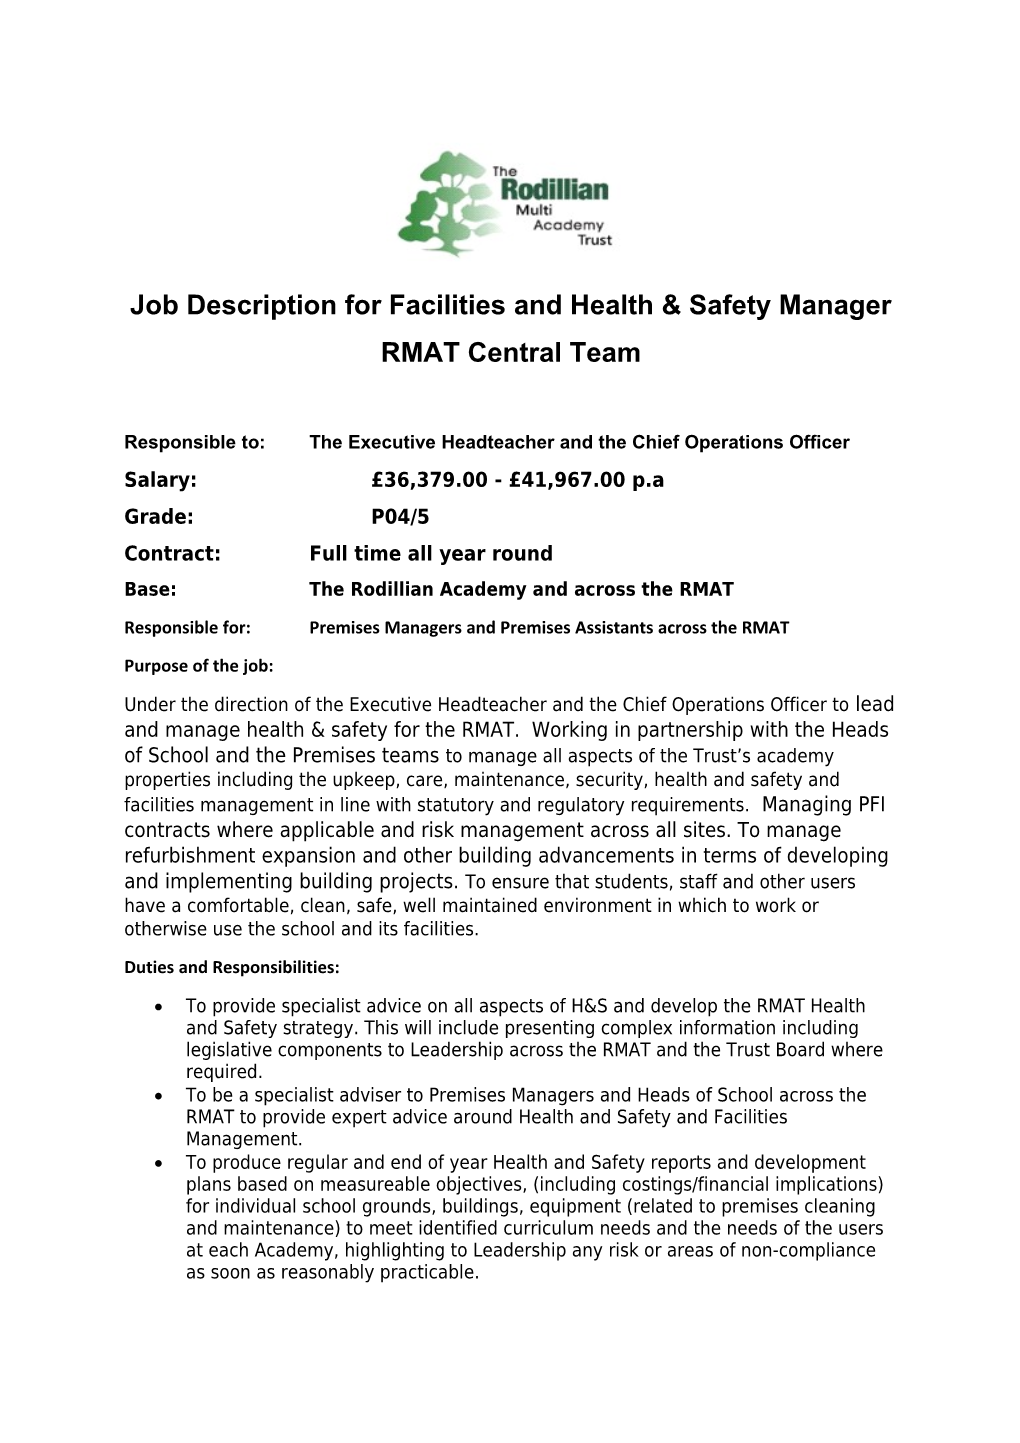 Job Description for Facilities and Health & Safety Manager